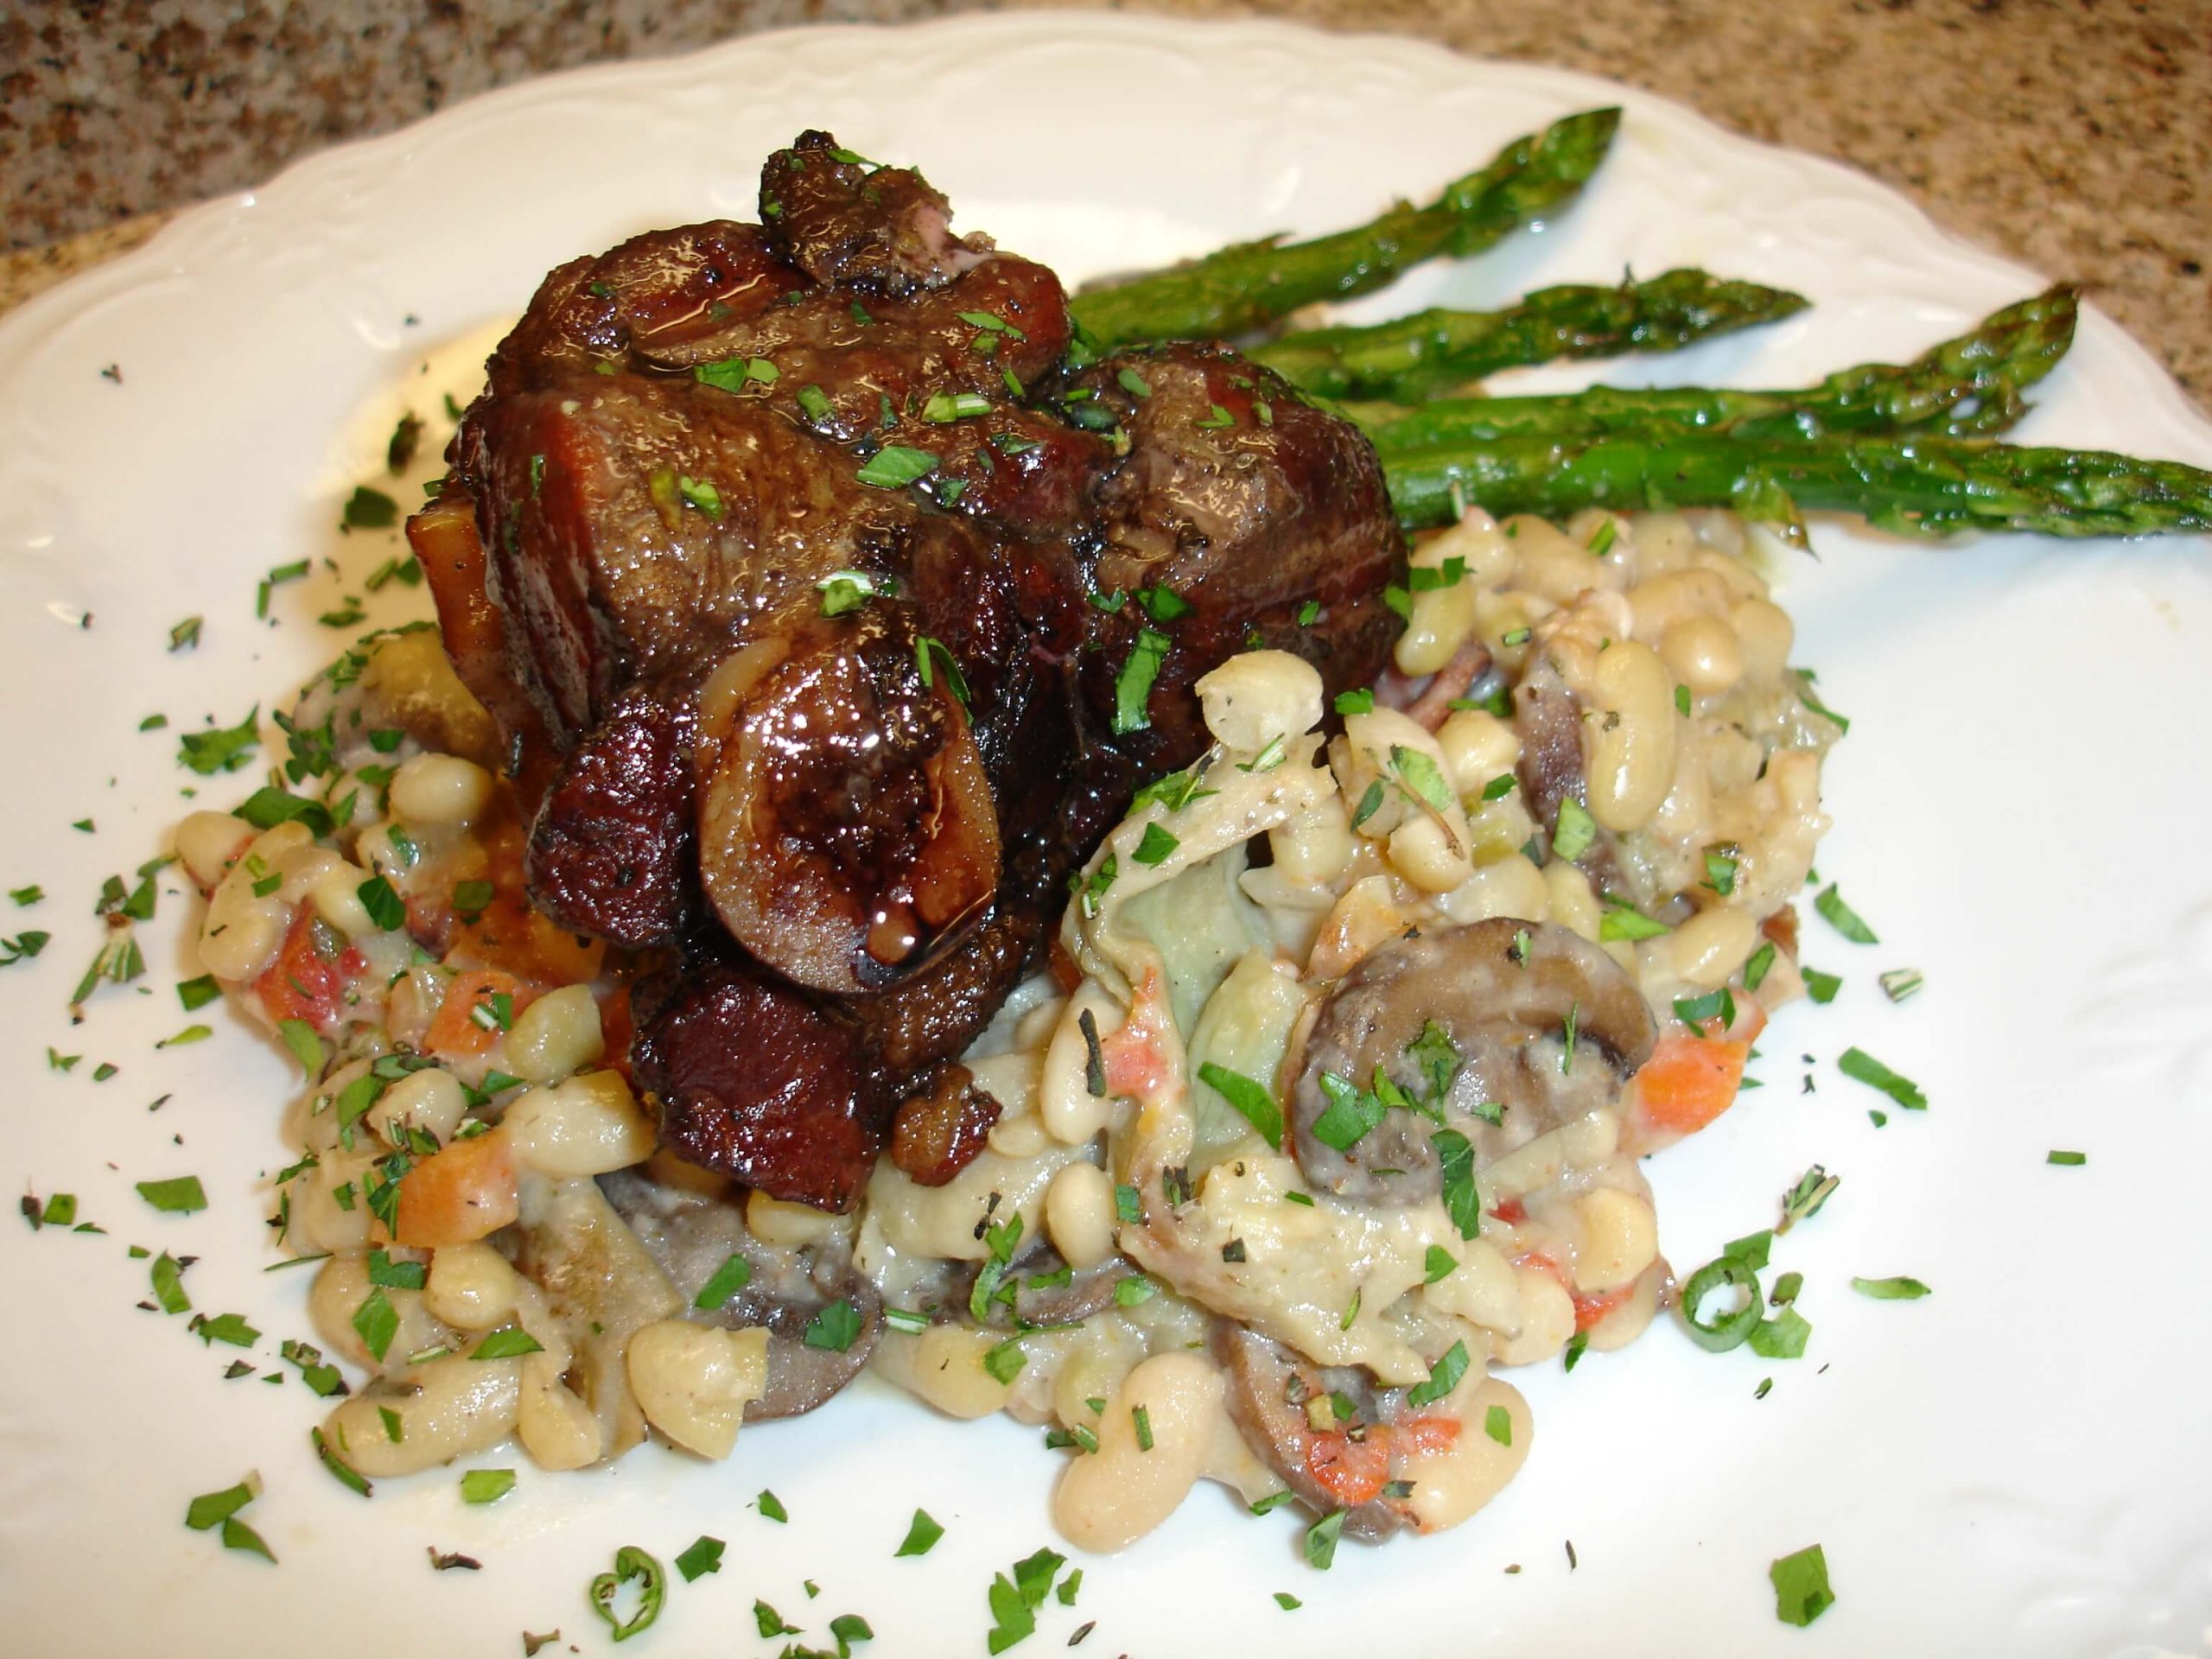 Braised Lamb Shanks with White Bean and Vegetable Ragout